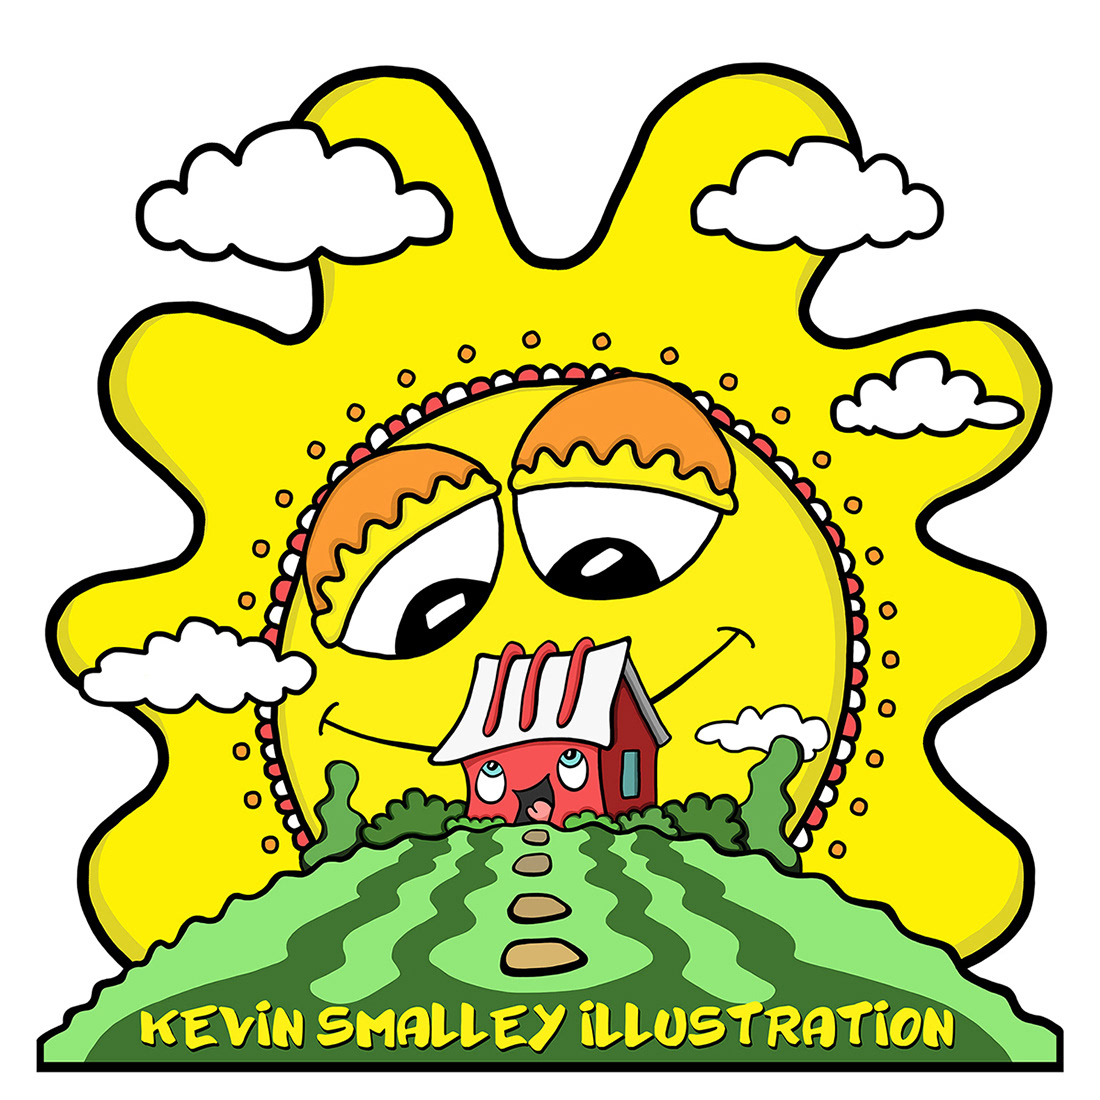 childrens book Fun happy ILLUSTRATION  kevin smalley Picture book Sun whimsical Display scbwi